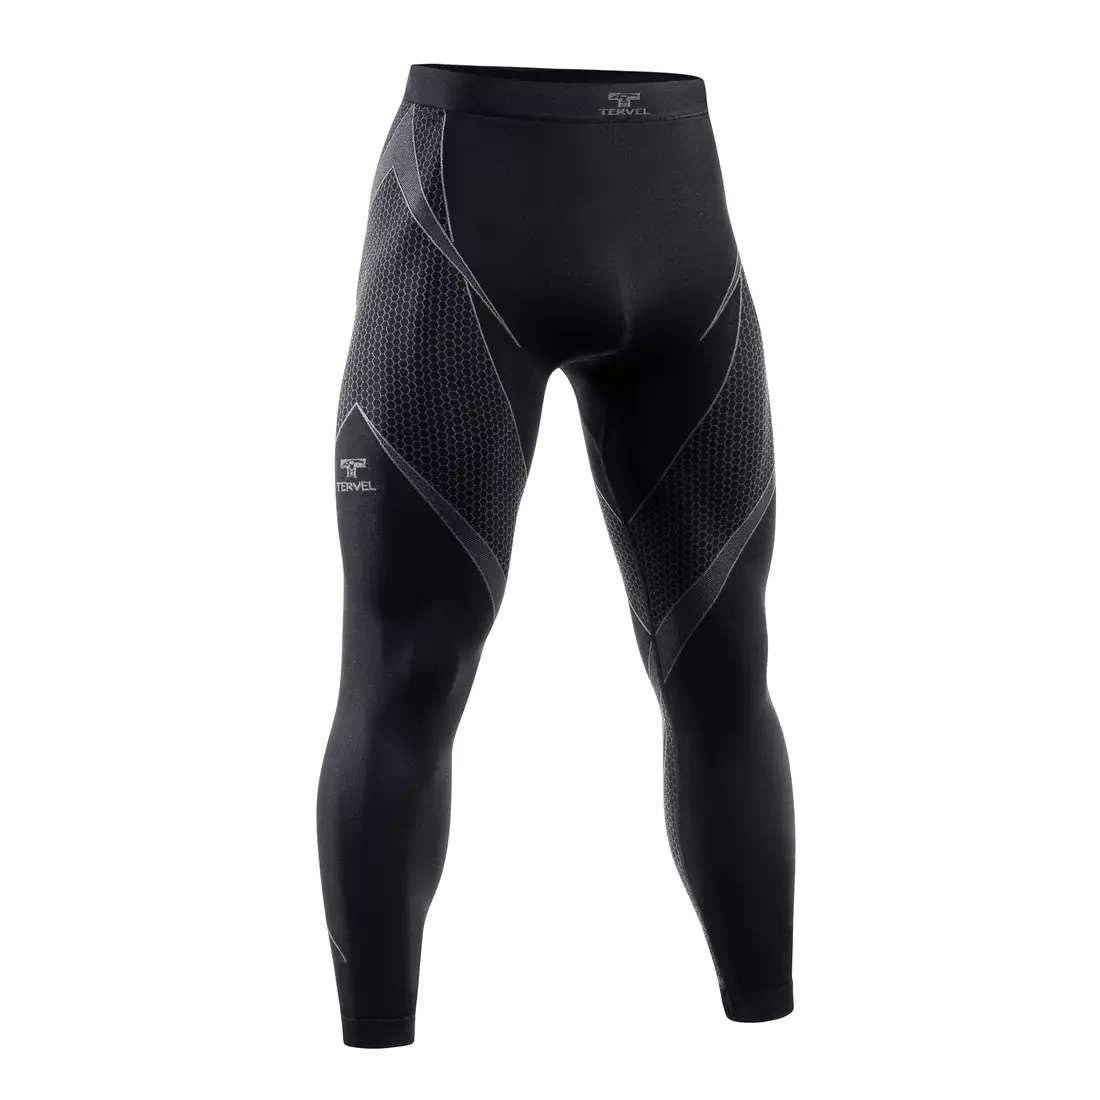 TERVEL OPTILINE OPT 3007 - men's thermoactive leggings color: black and gray